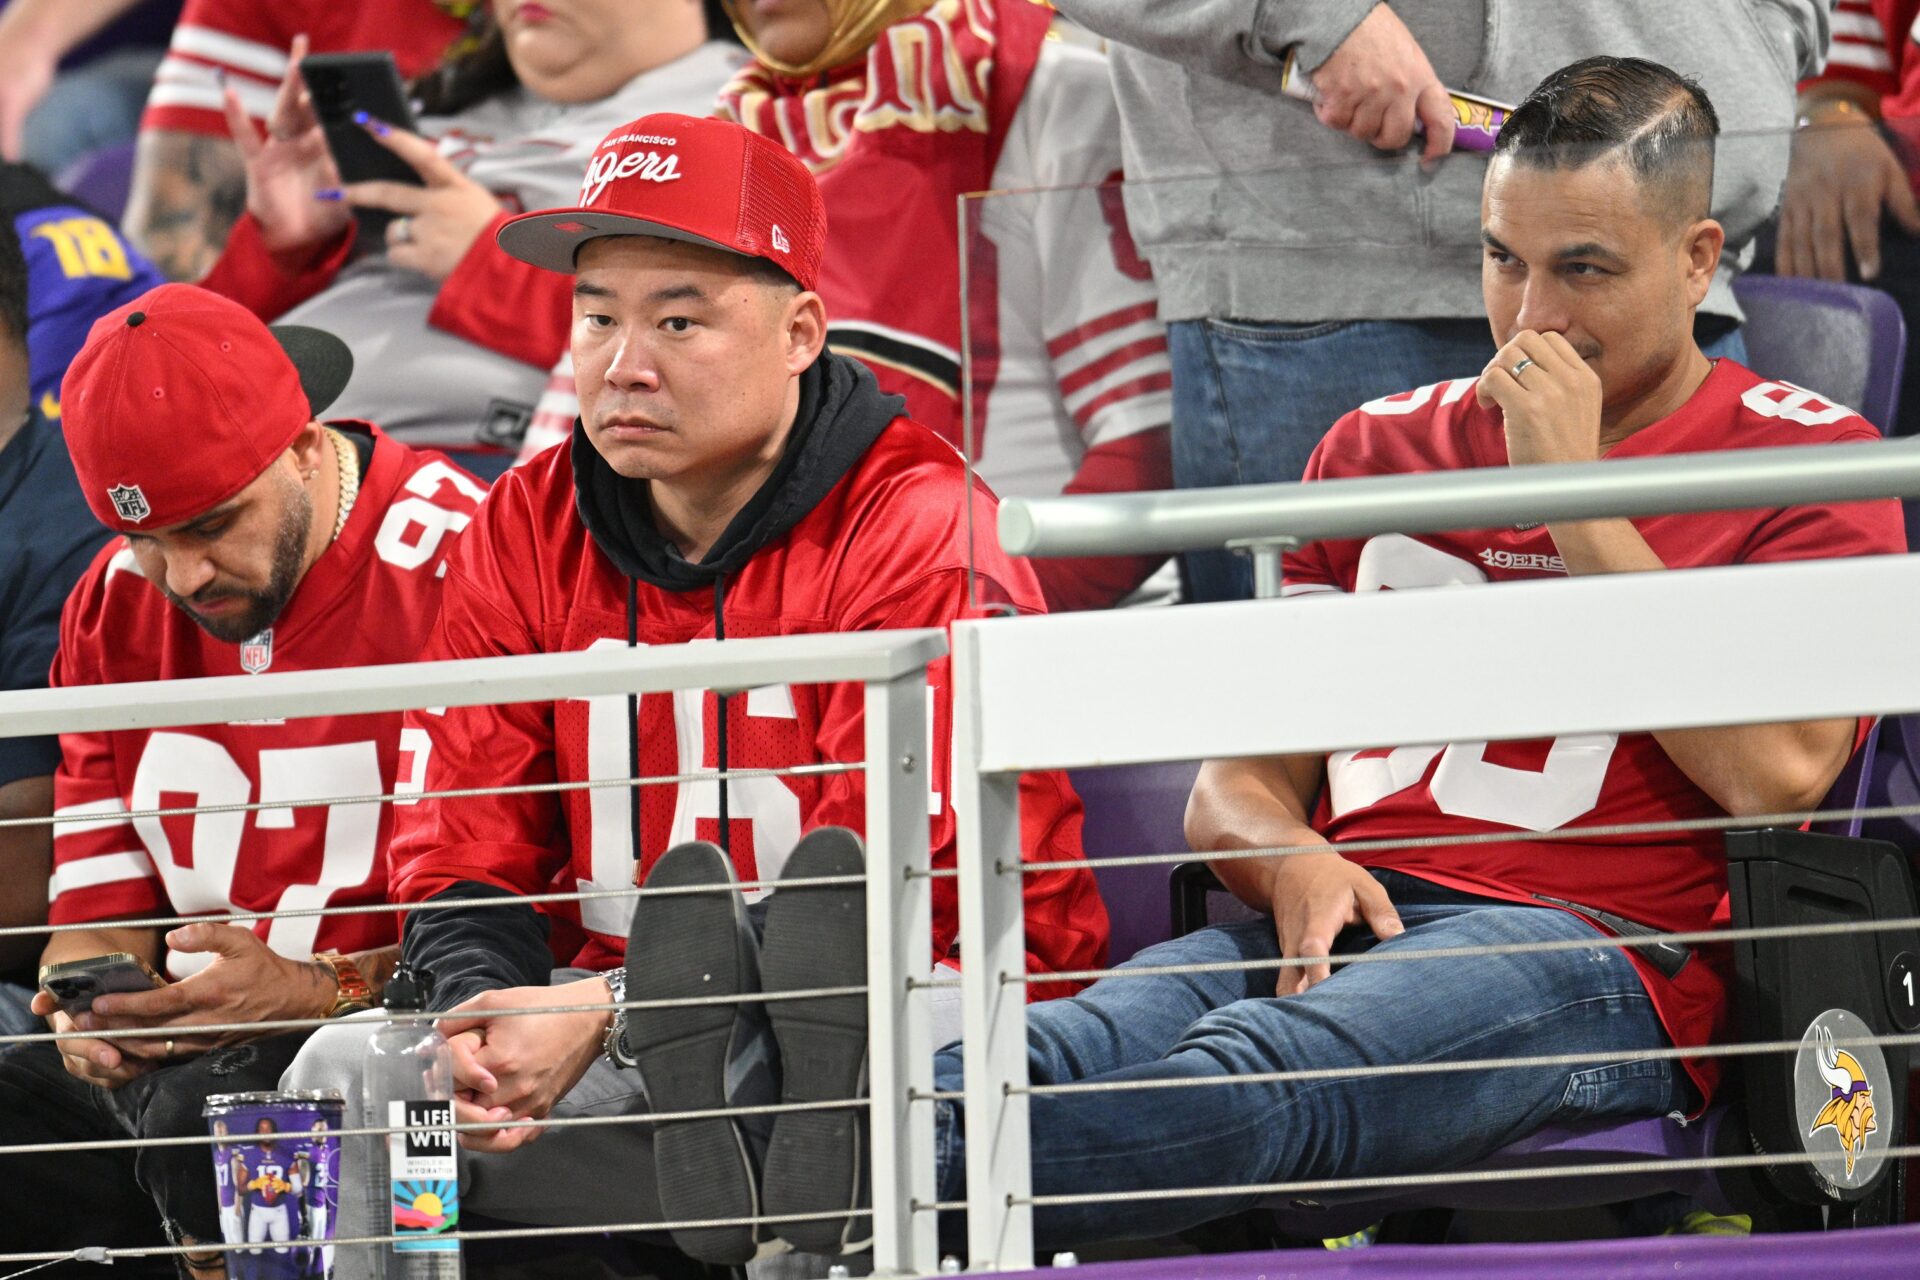 San Francisco 49ers fans react after the game against the Minnesota Vikings at U.S. Bank Stadium.